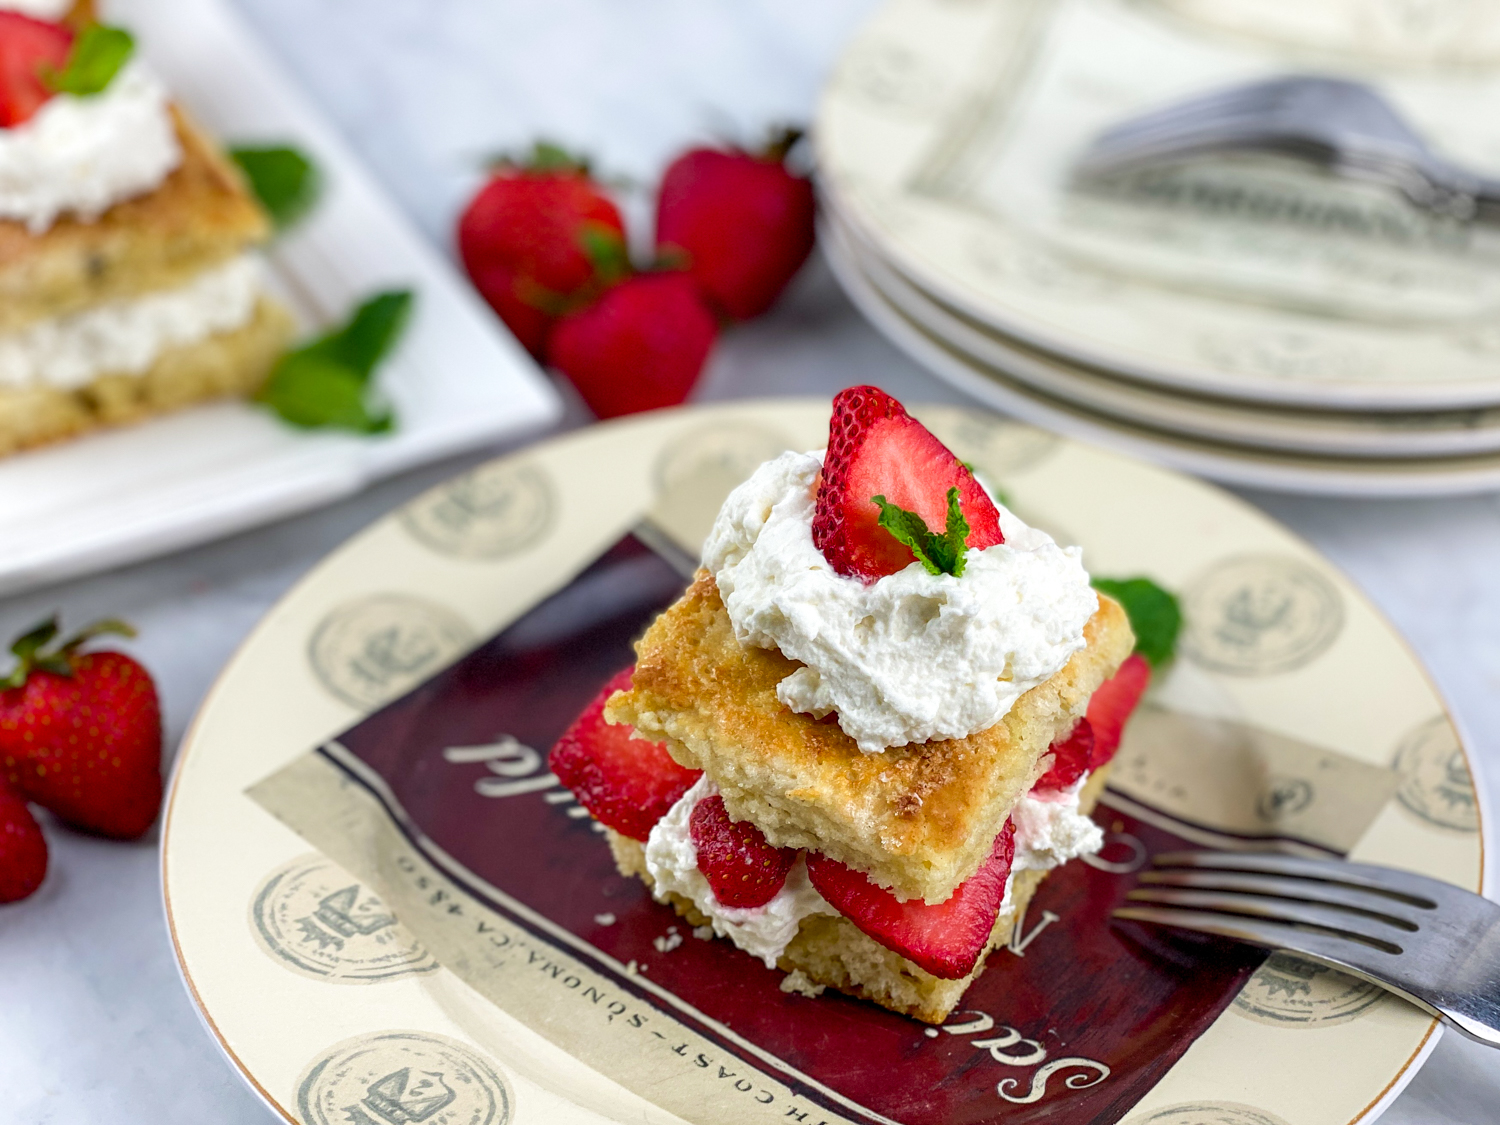 trawberry Shortcake with Sweet Biscuits